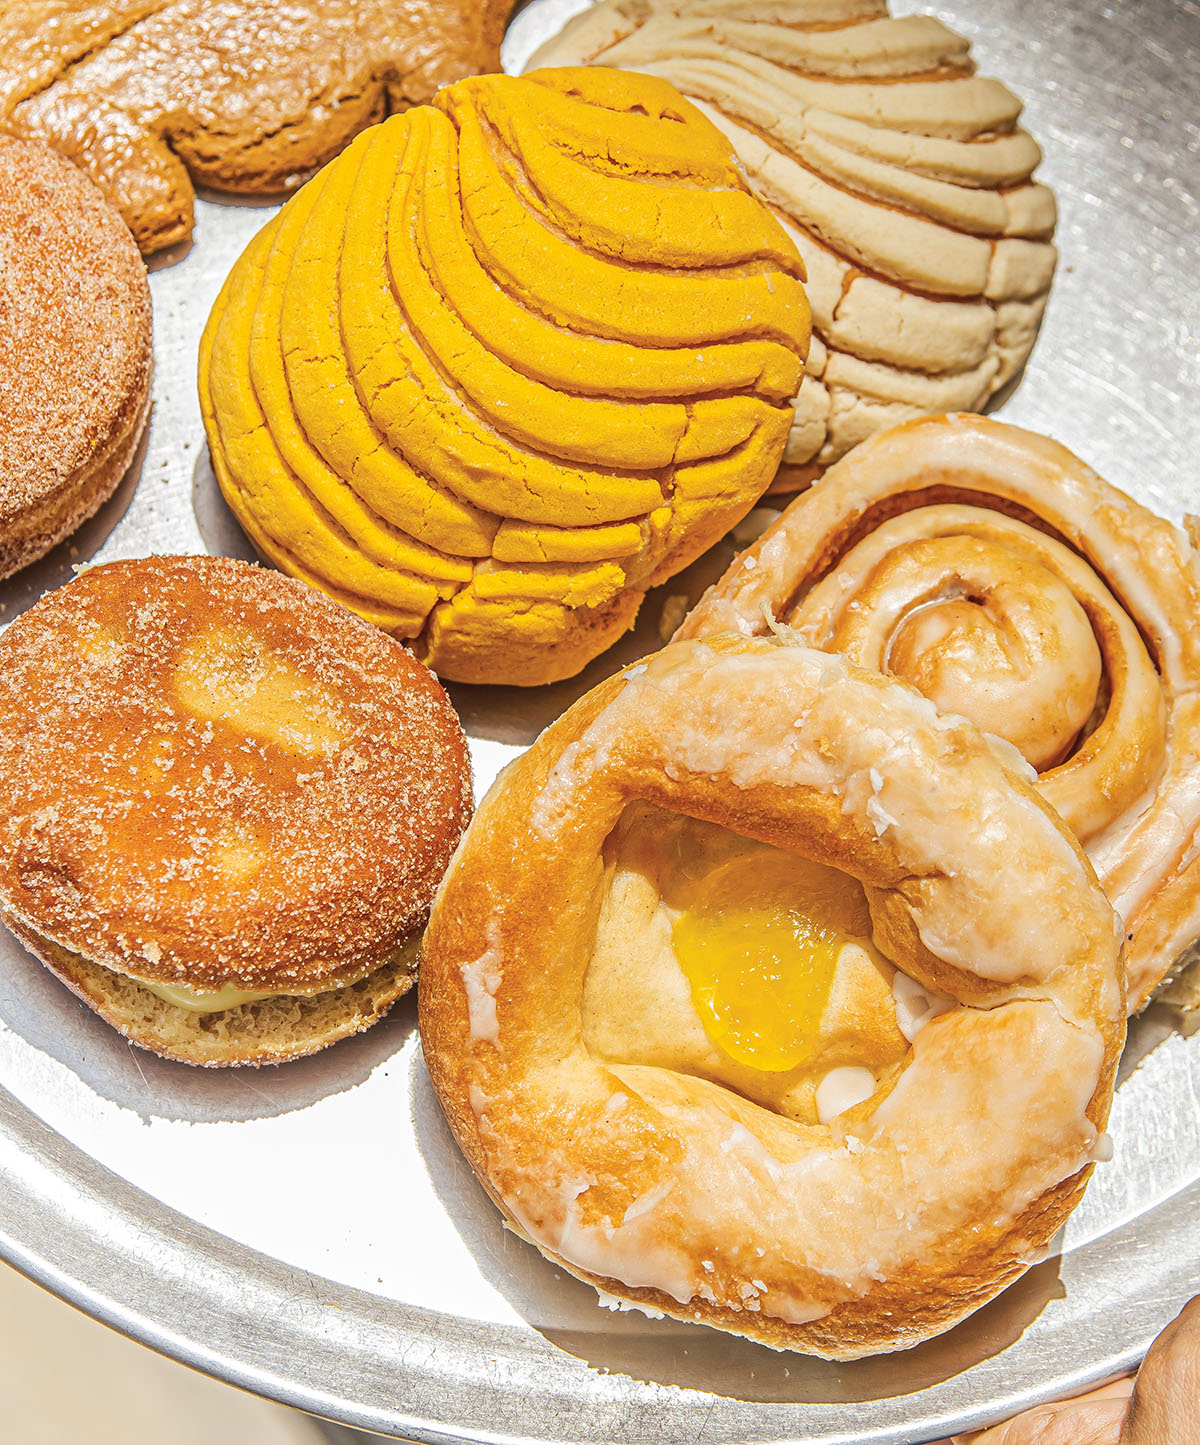 A collection of golden yellow pastries on a steel plate